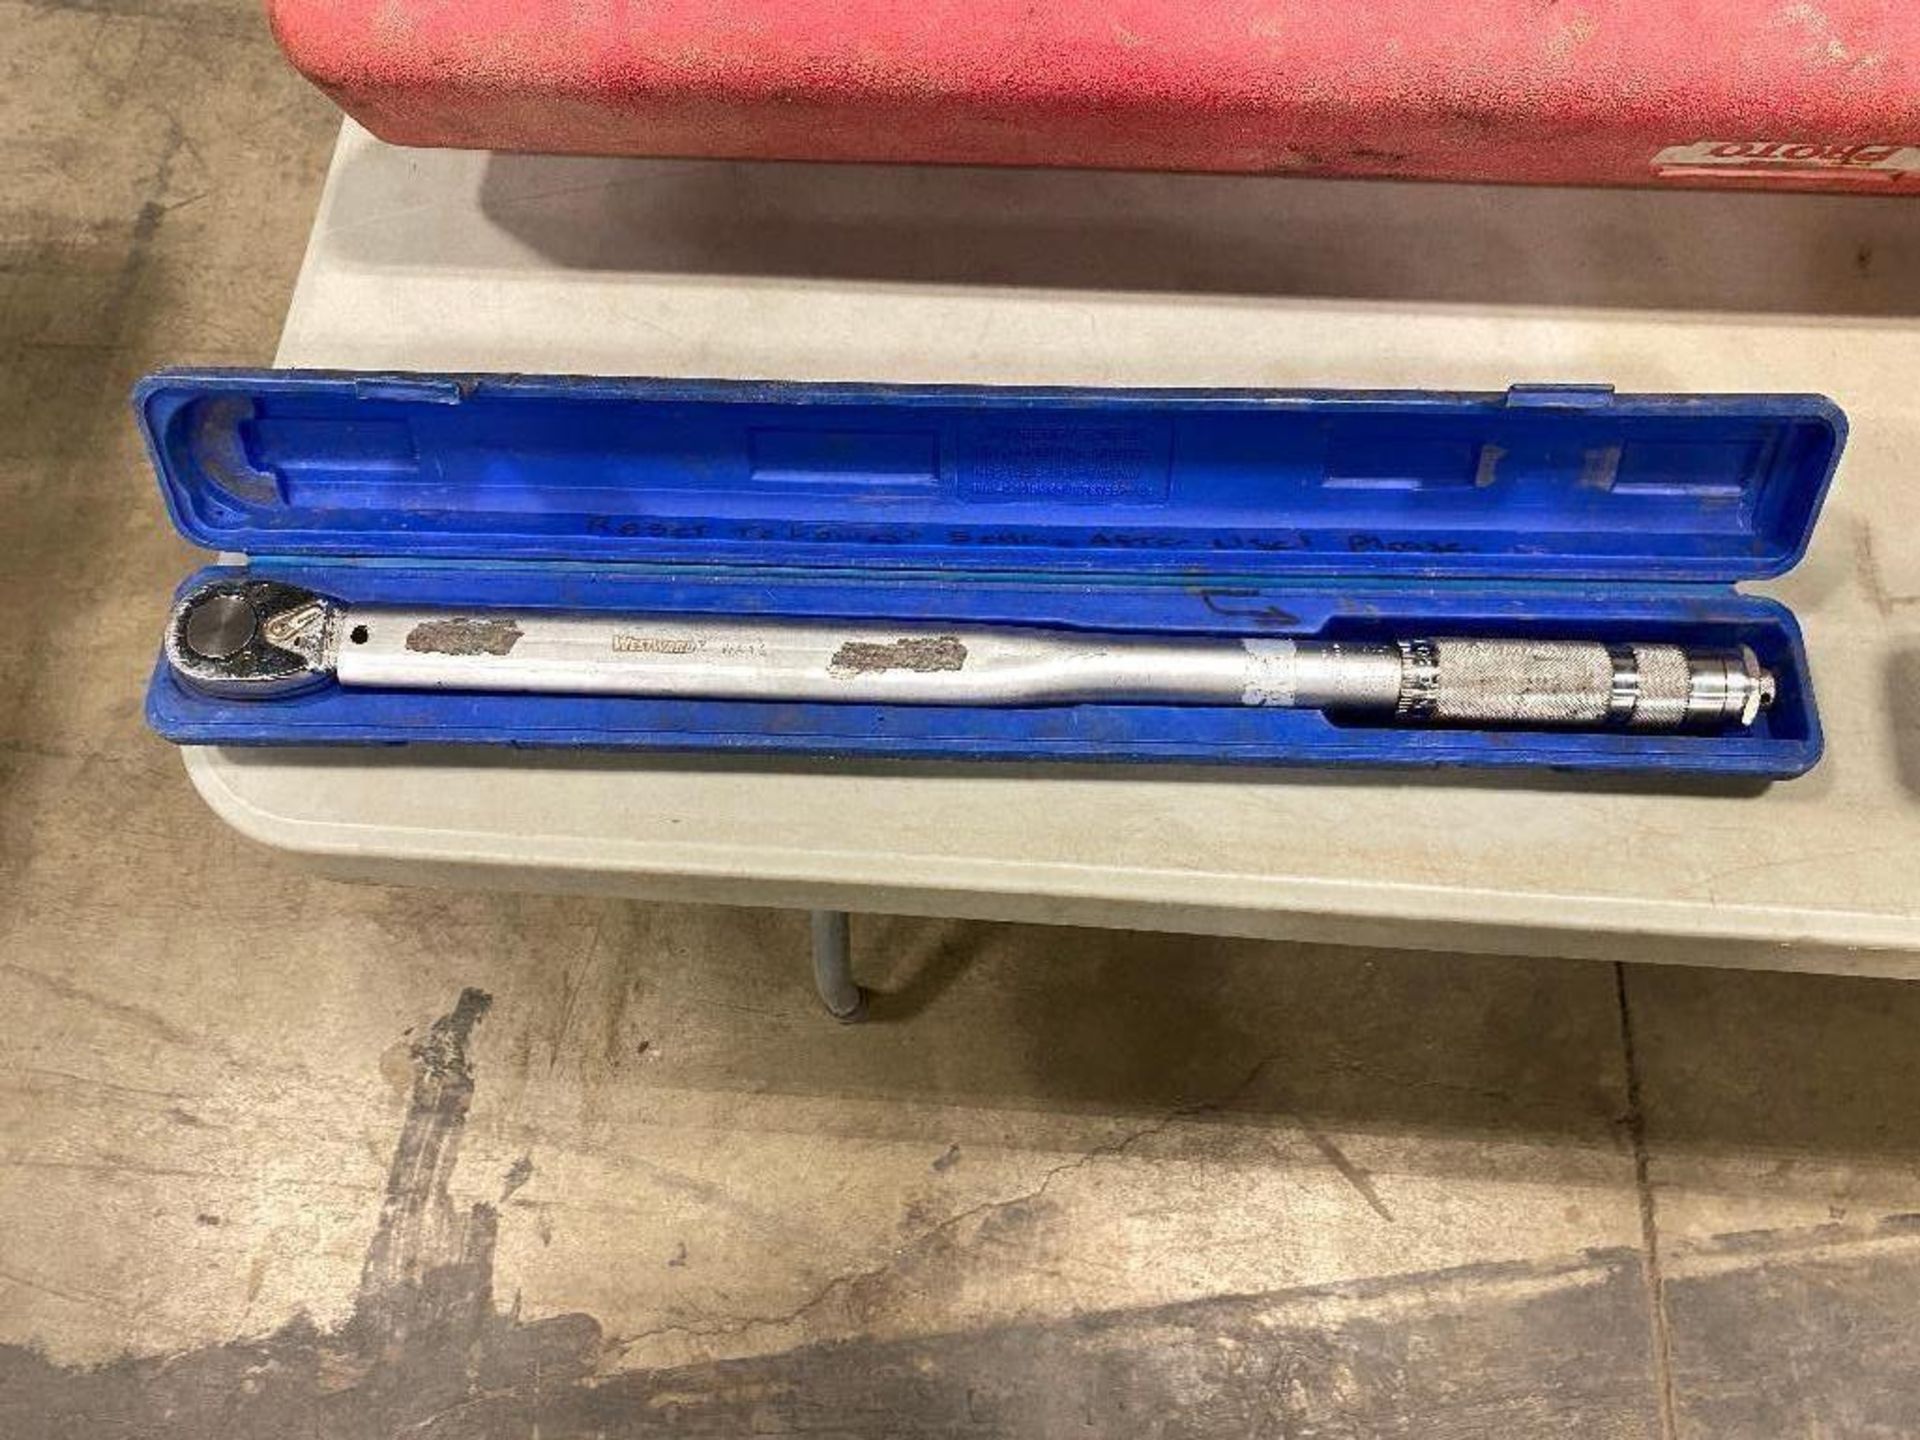 Westward 1/2" 250ft.-lb. Torque Wrench - Image 2 of 6